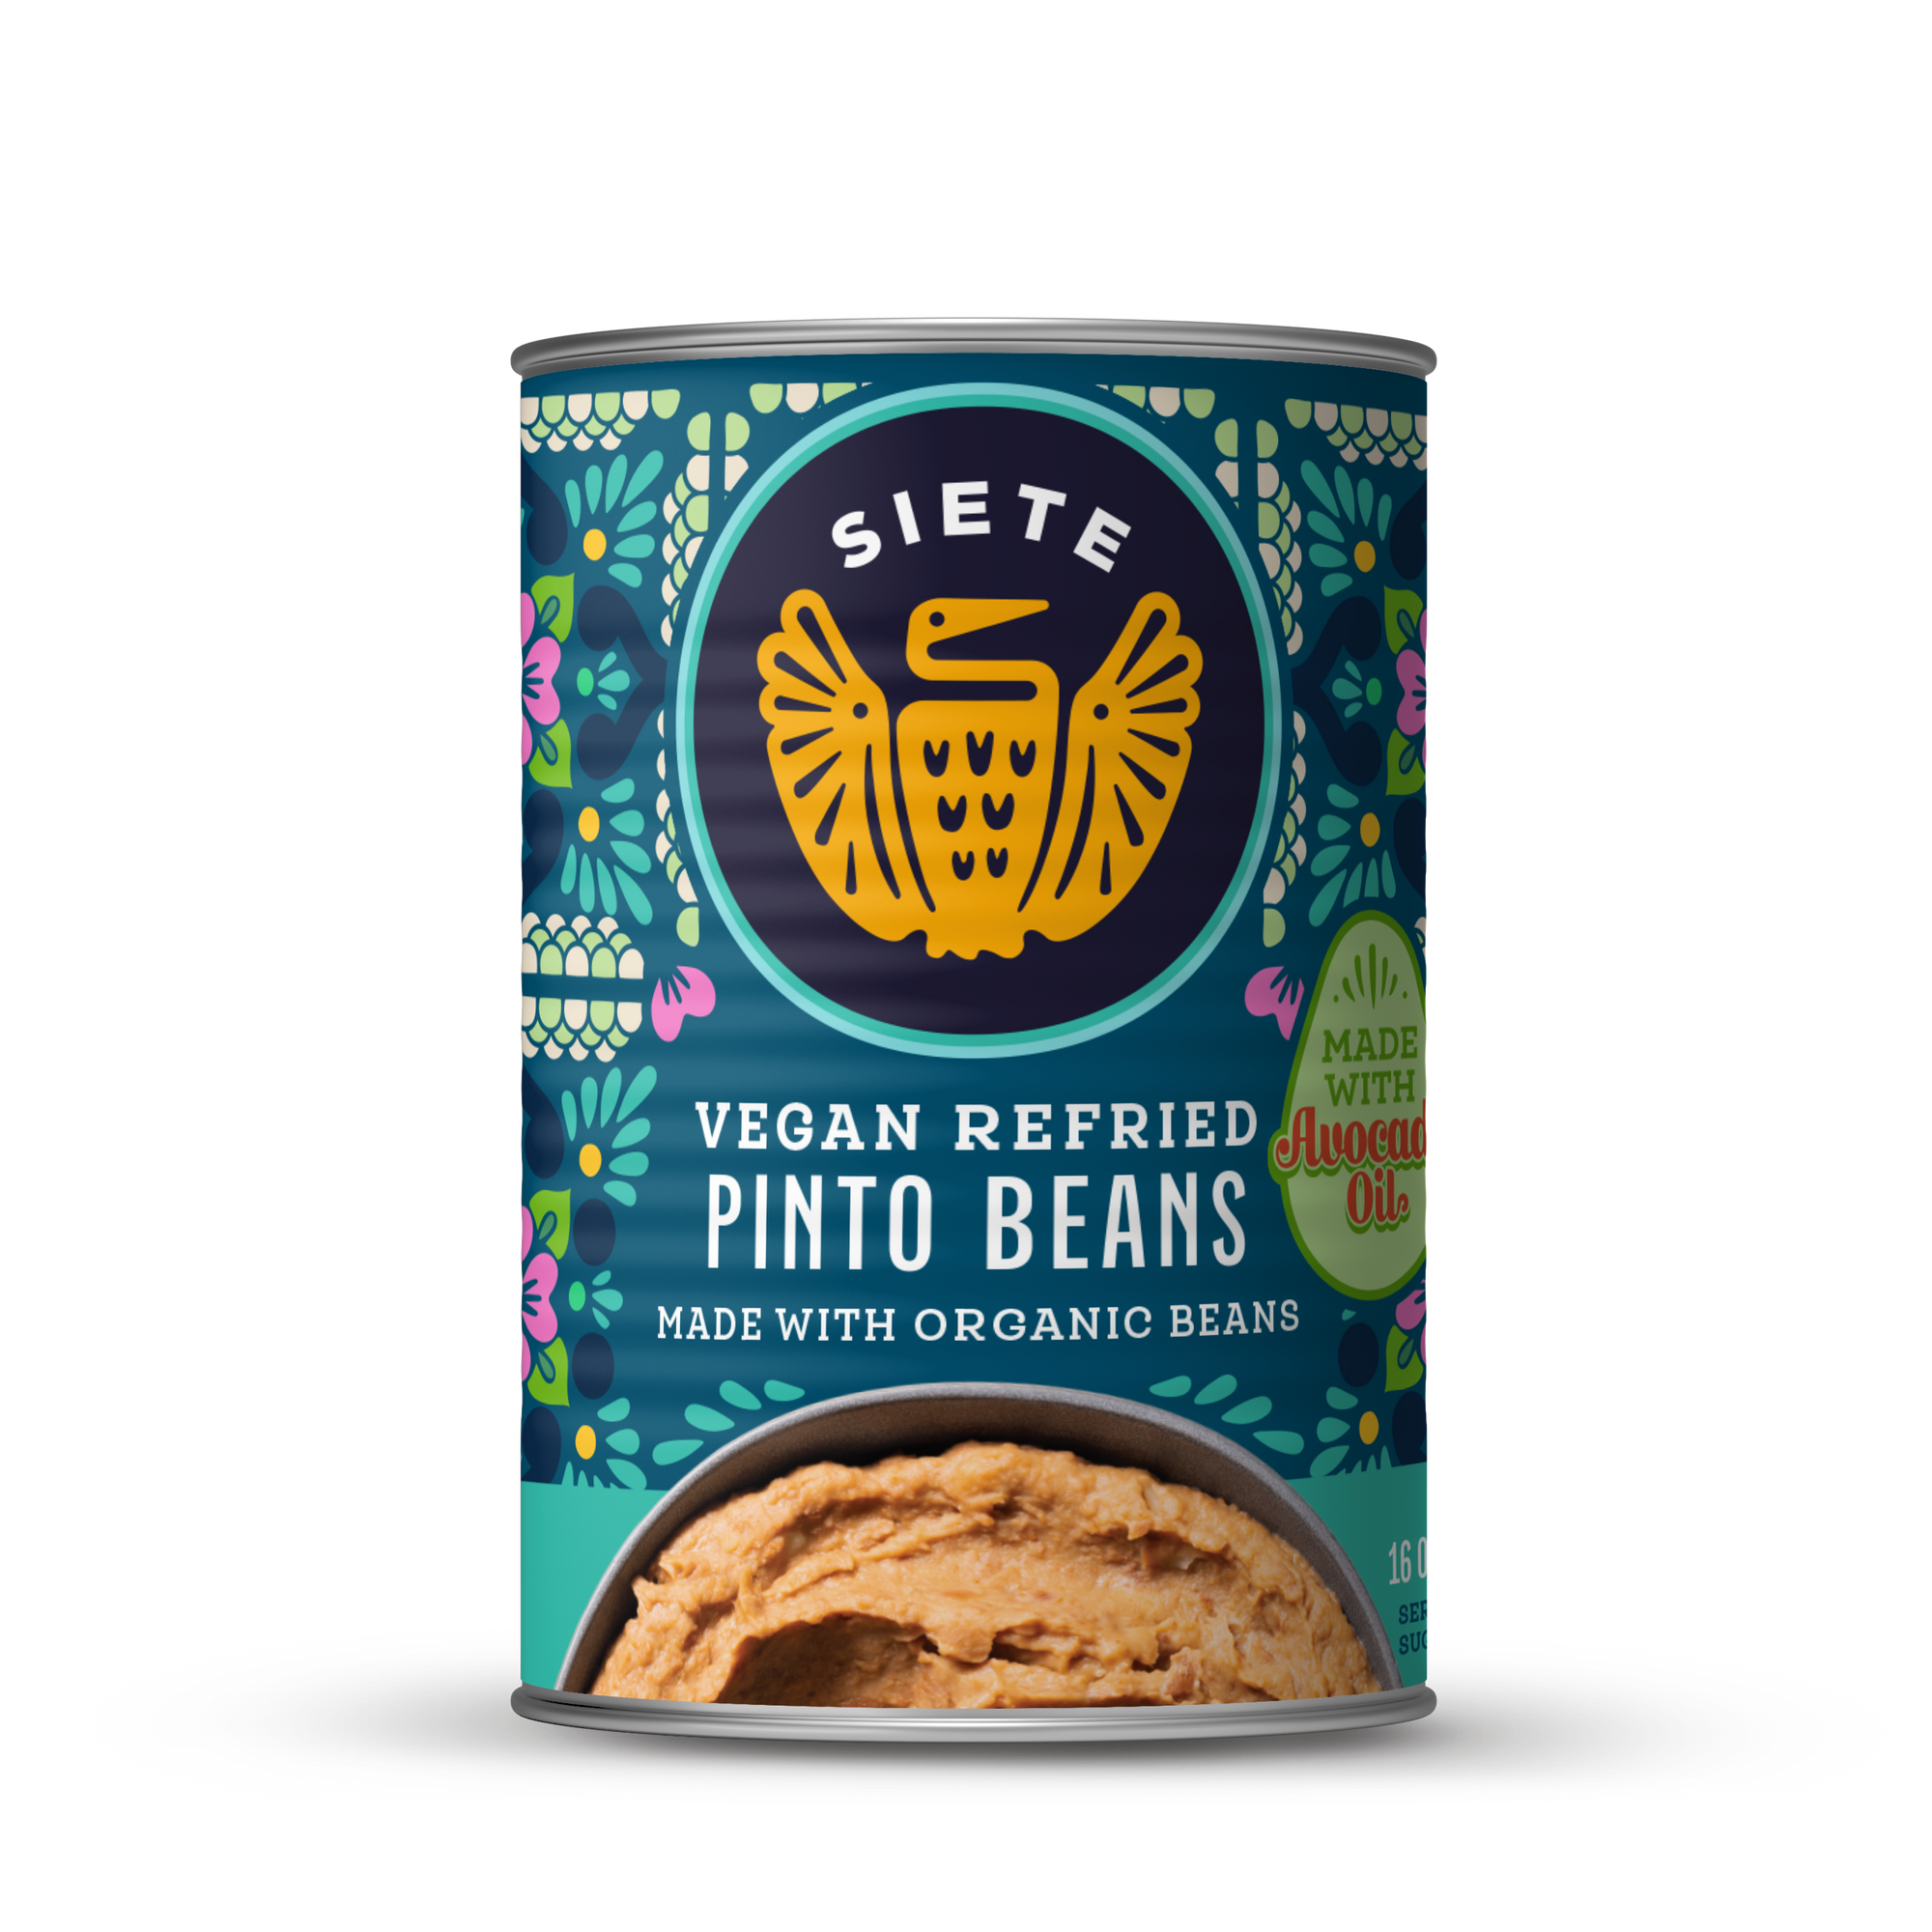 Vegan Refried Pinto Beans - 1 Can